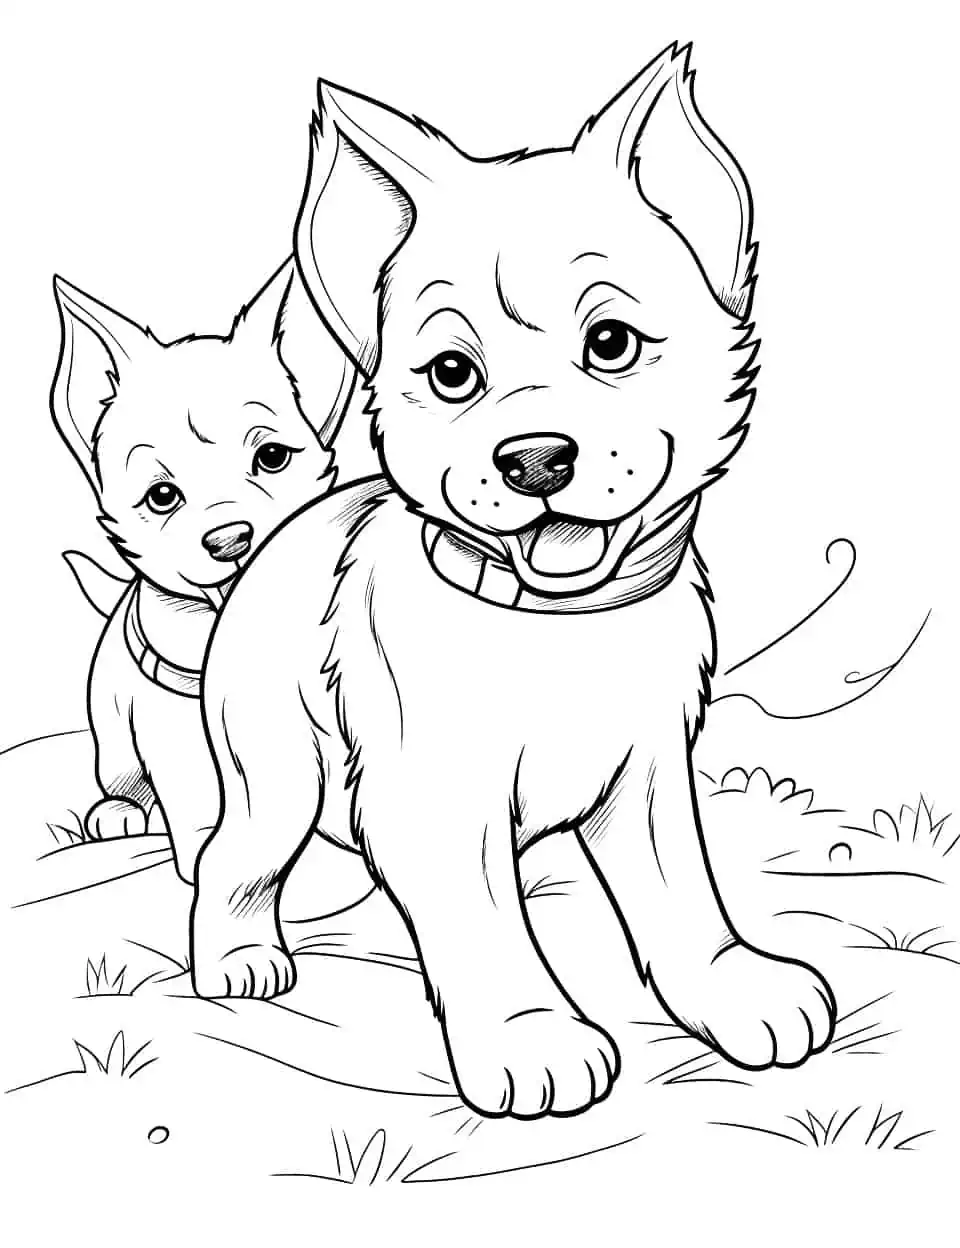 Playful Husky Puppies Coloring Page - Two adorable Husky puppies playing in the grass.